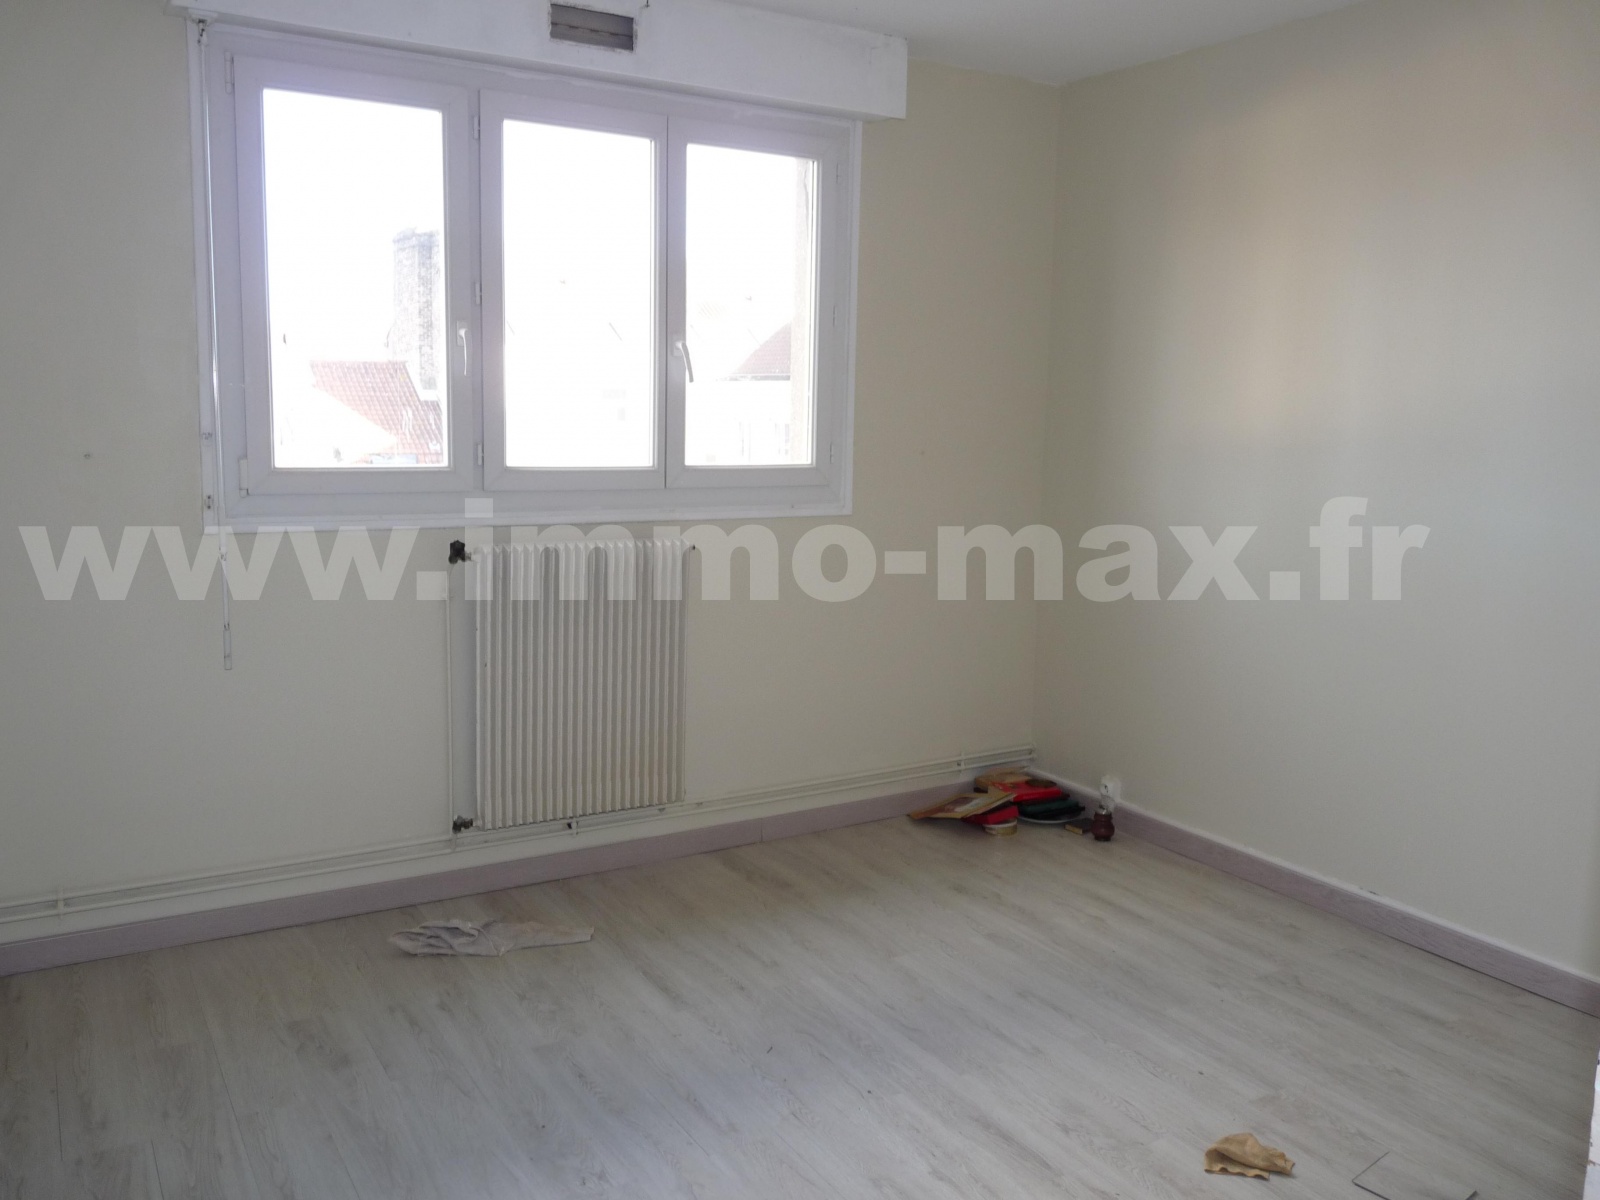 Appartement T4, 3 chambres, Dunkerque